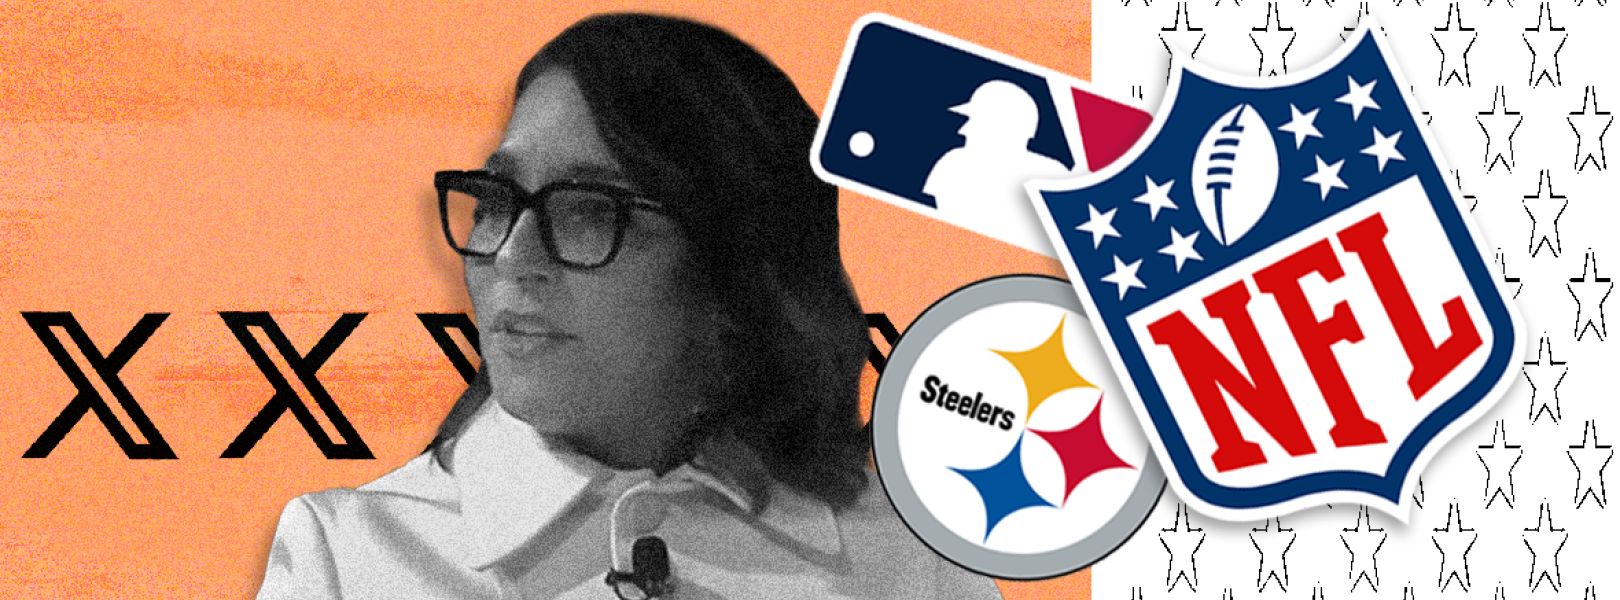 Yaccarino and the logos of MLB, the NFL, and the Pittsburgh Steelers